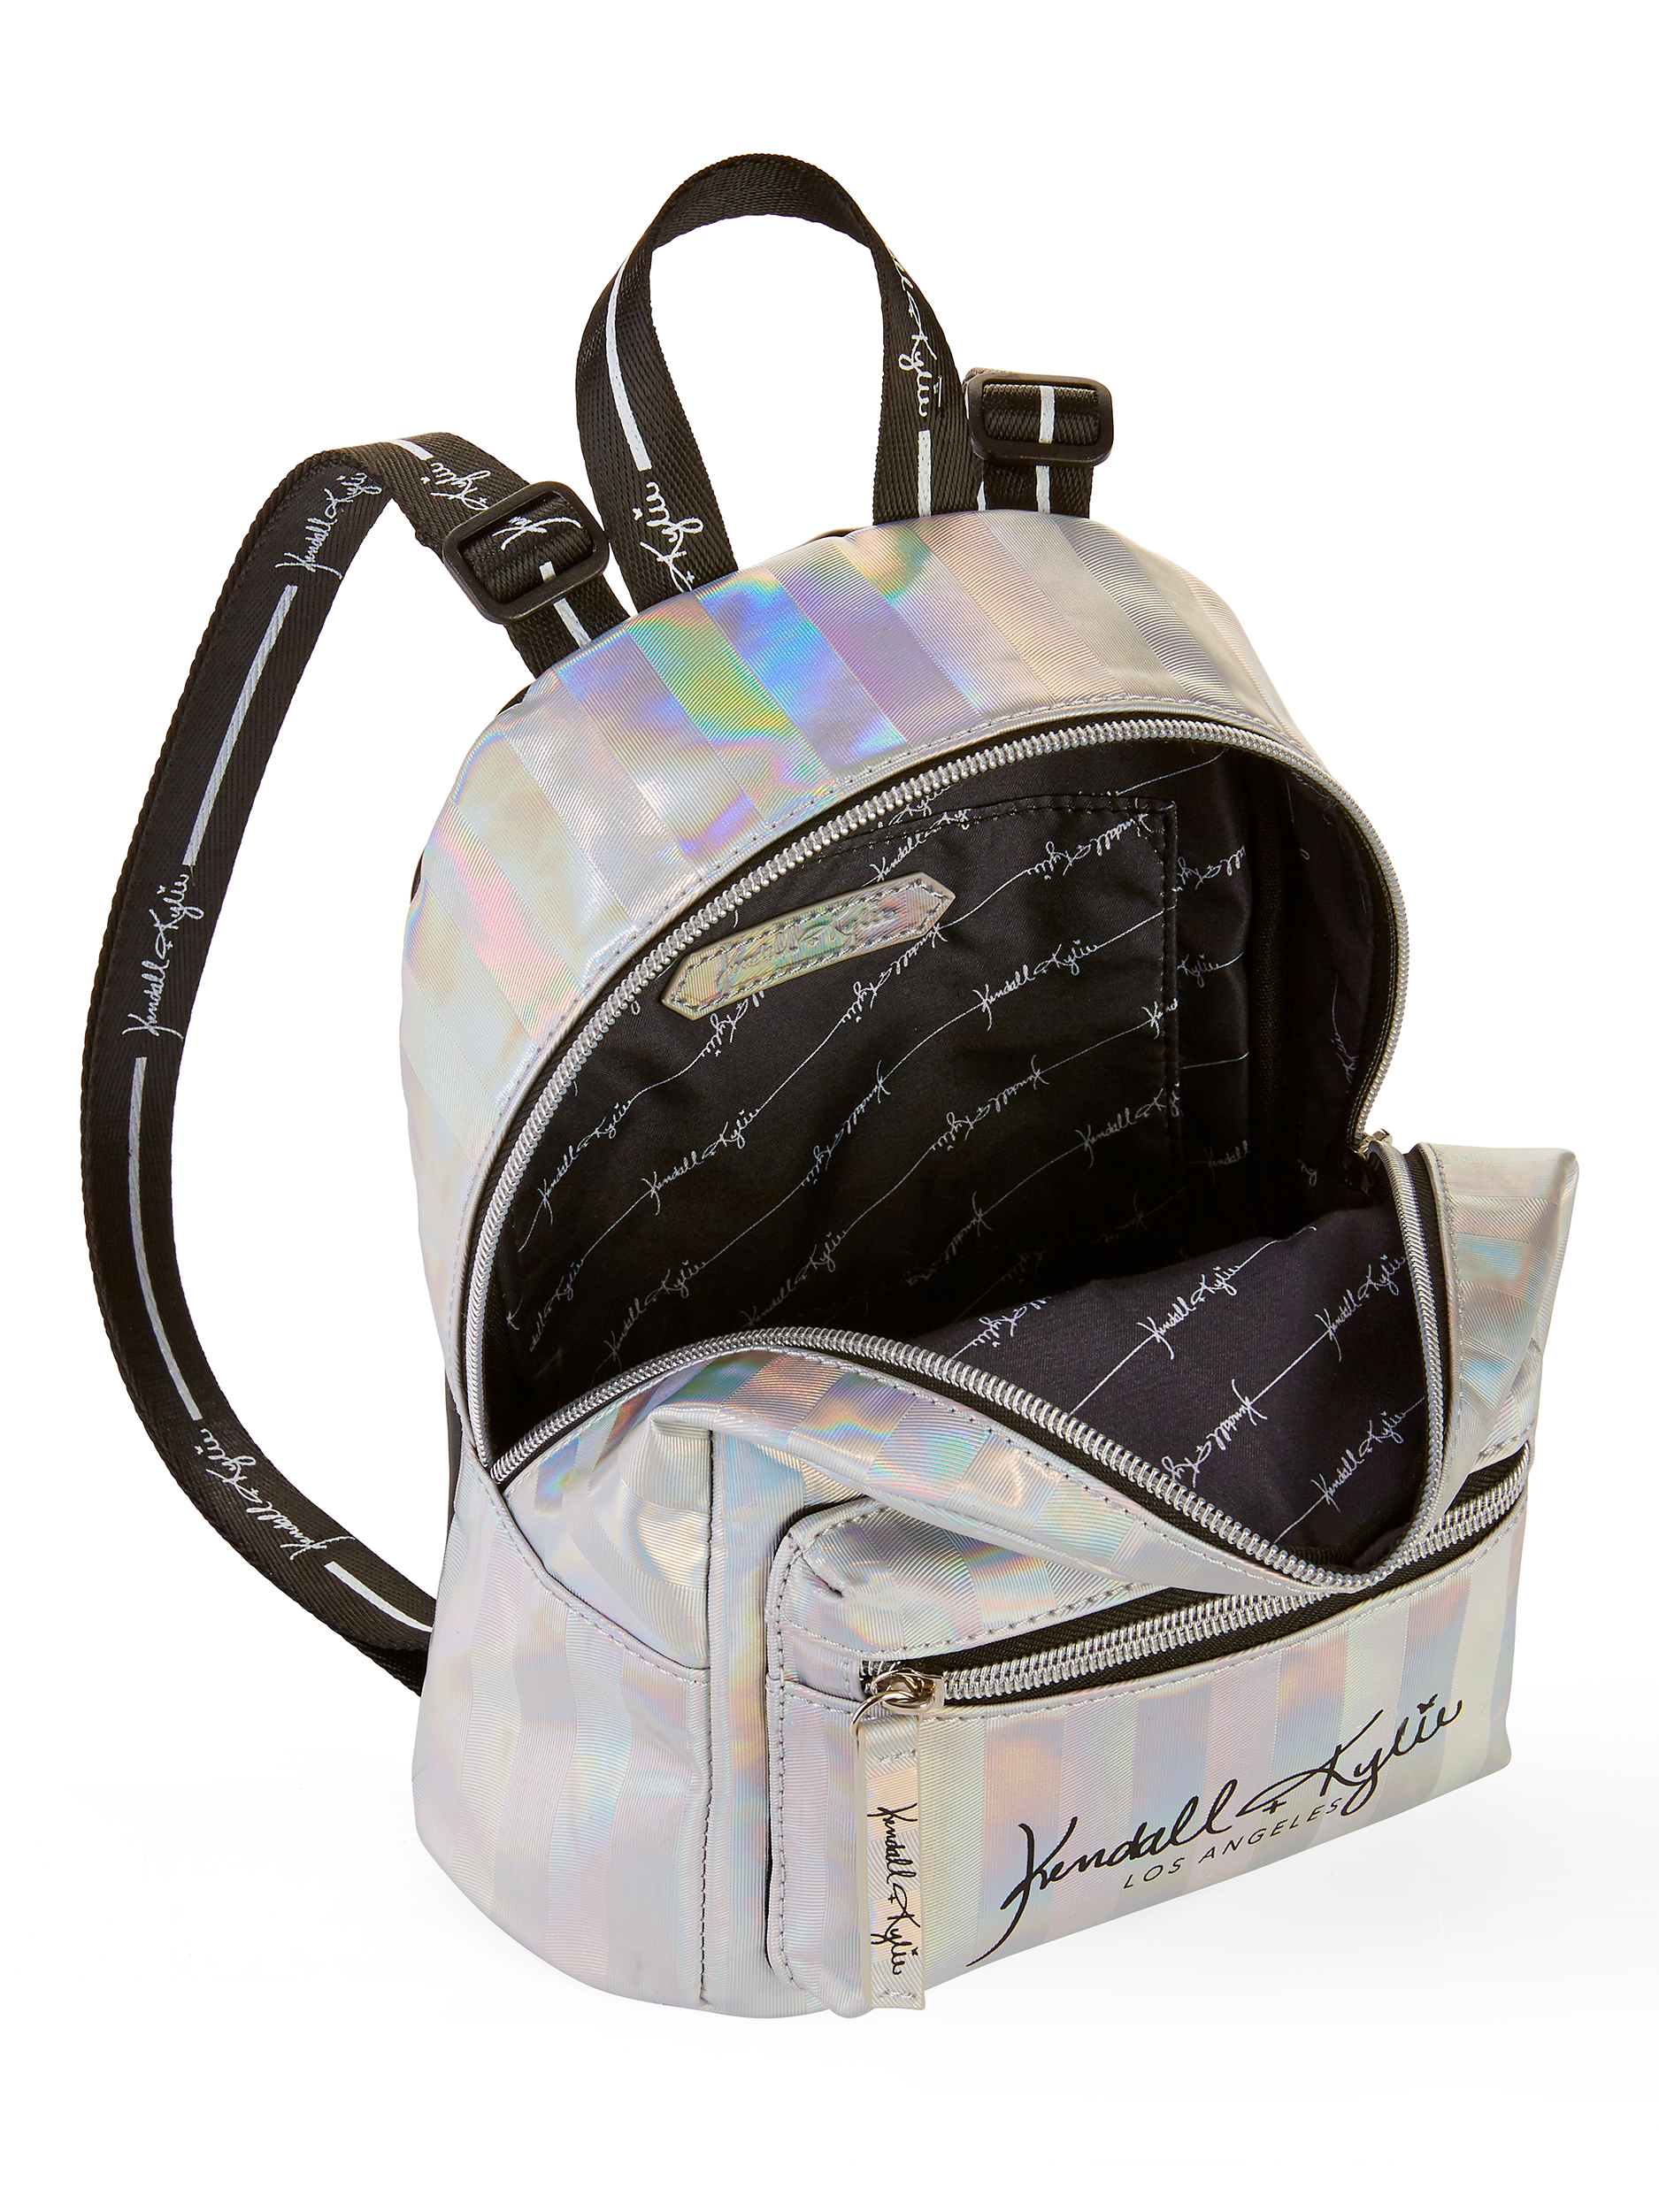 Kendall + Kylie for Walmart Iridescent Mini Backpack - image 3 of 5